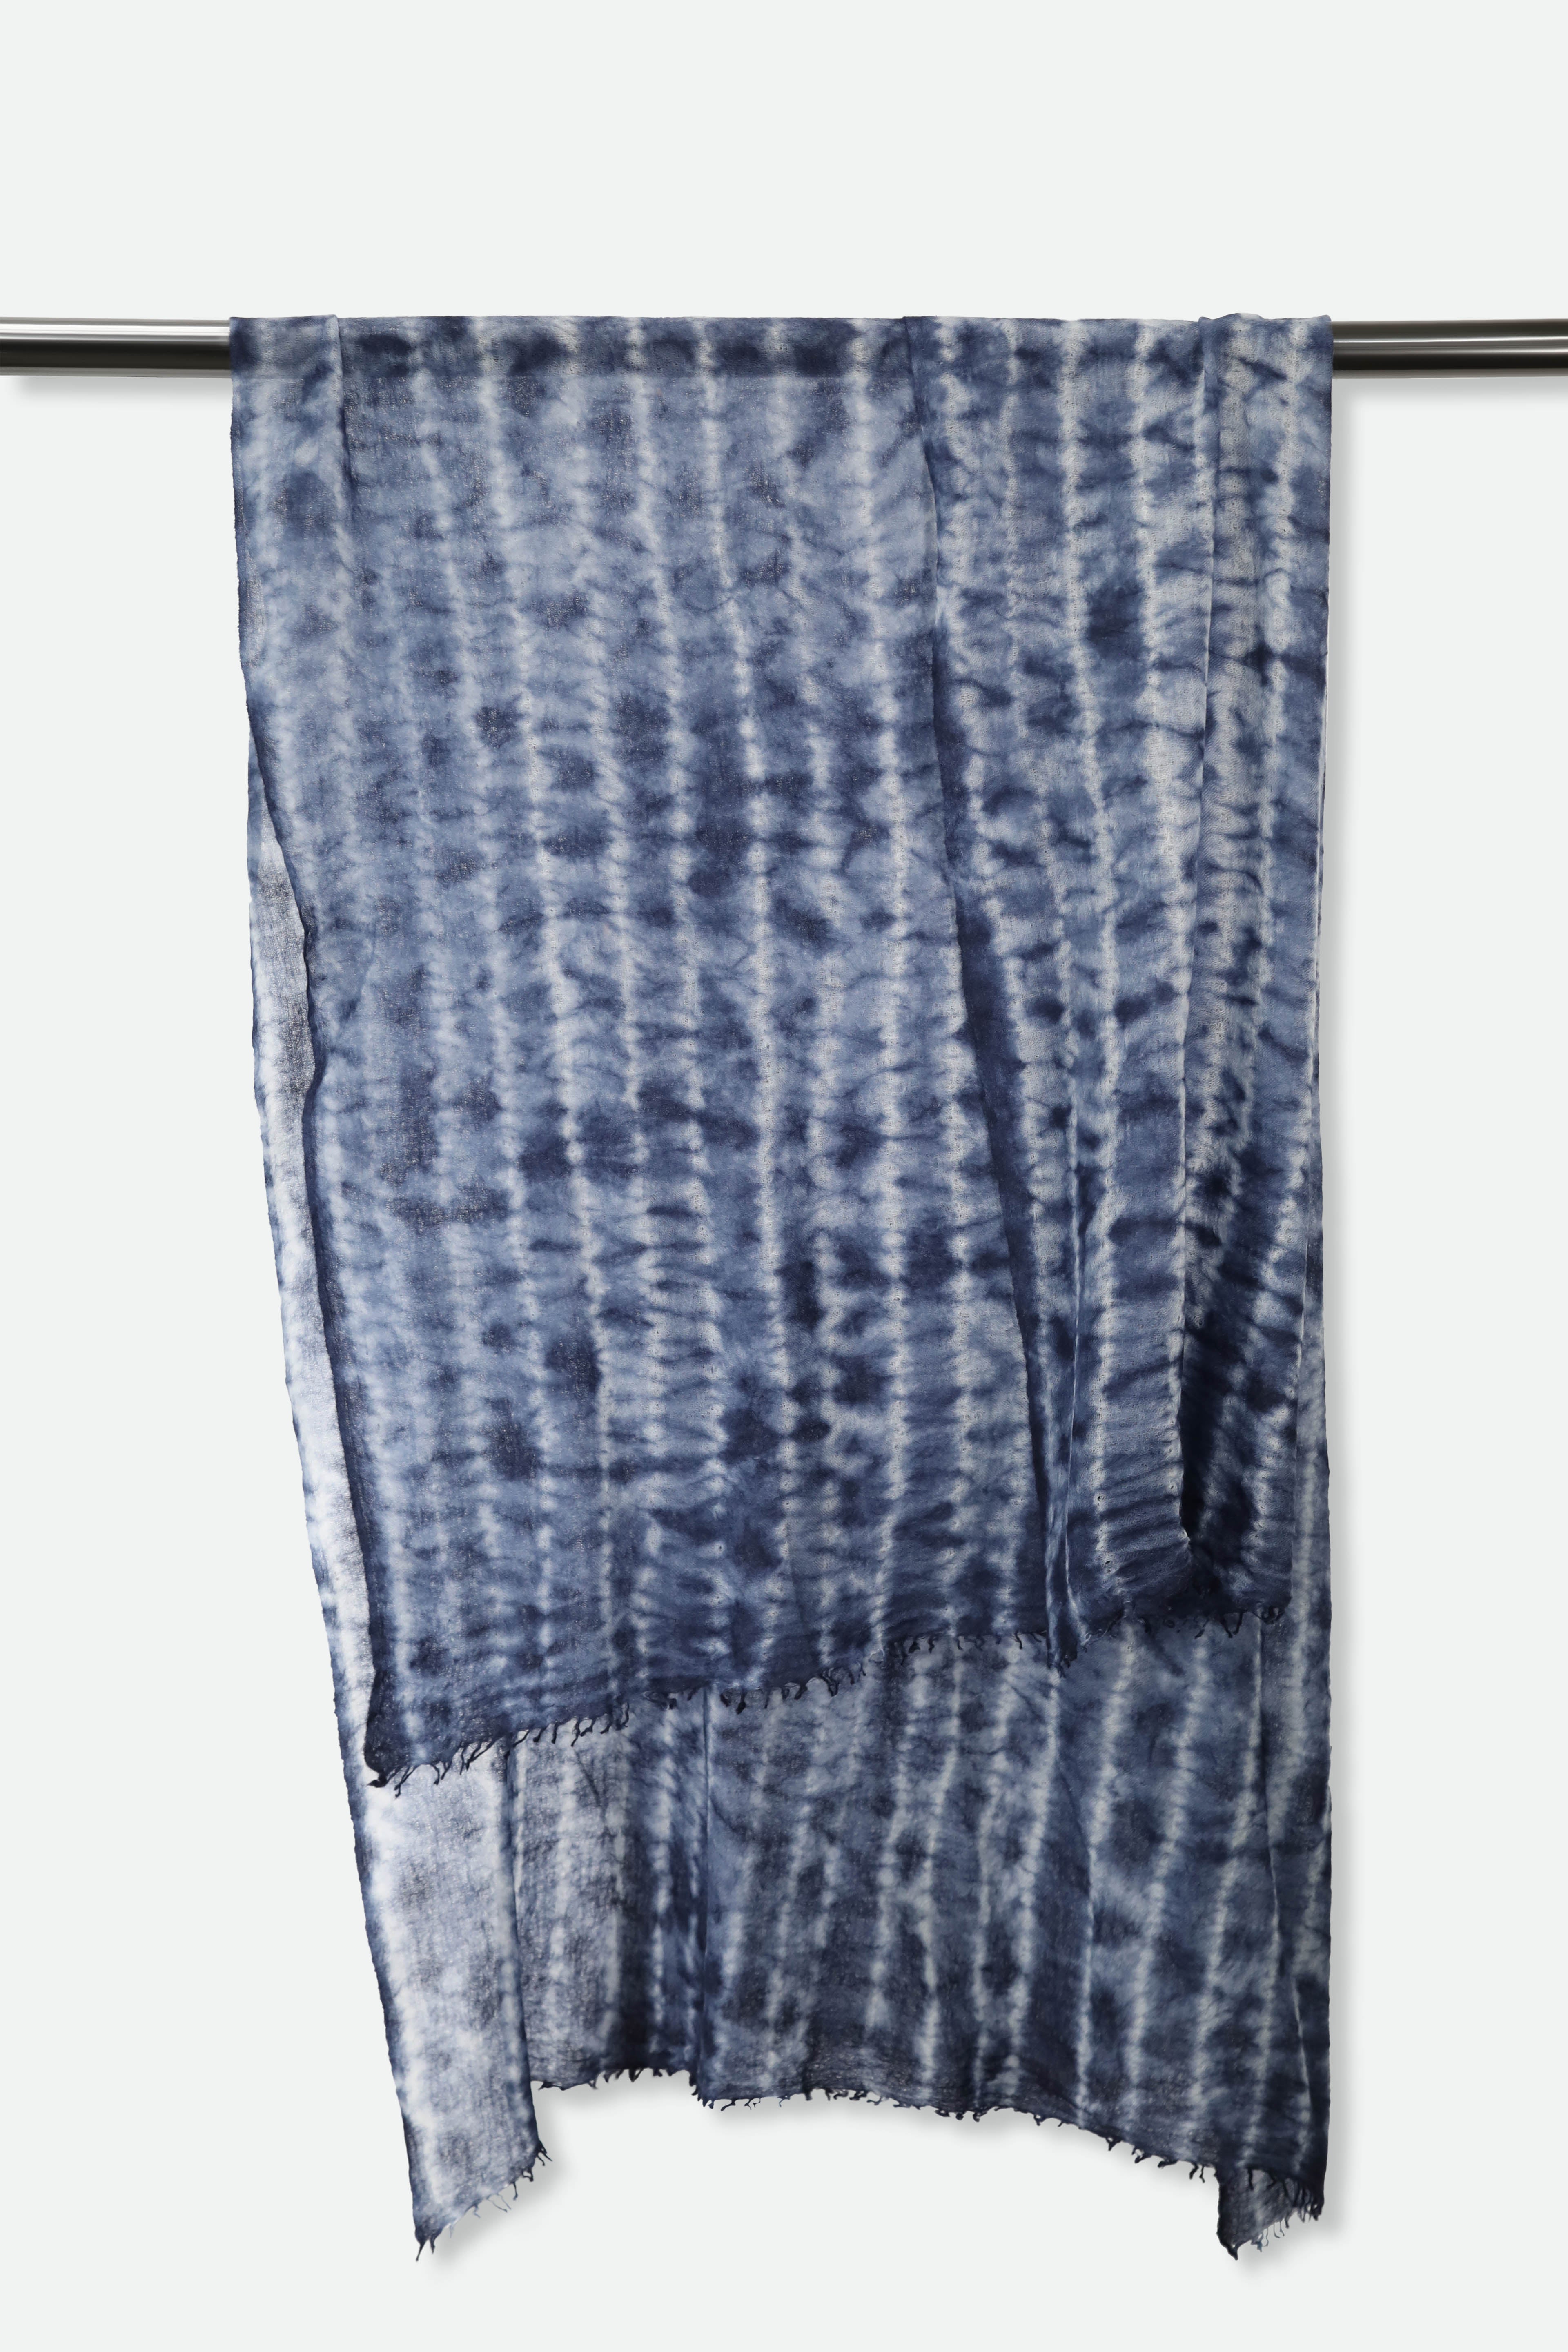 INDIGO WATER SCARF IN HAND DYED CASHMERE - Jarbo